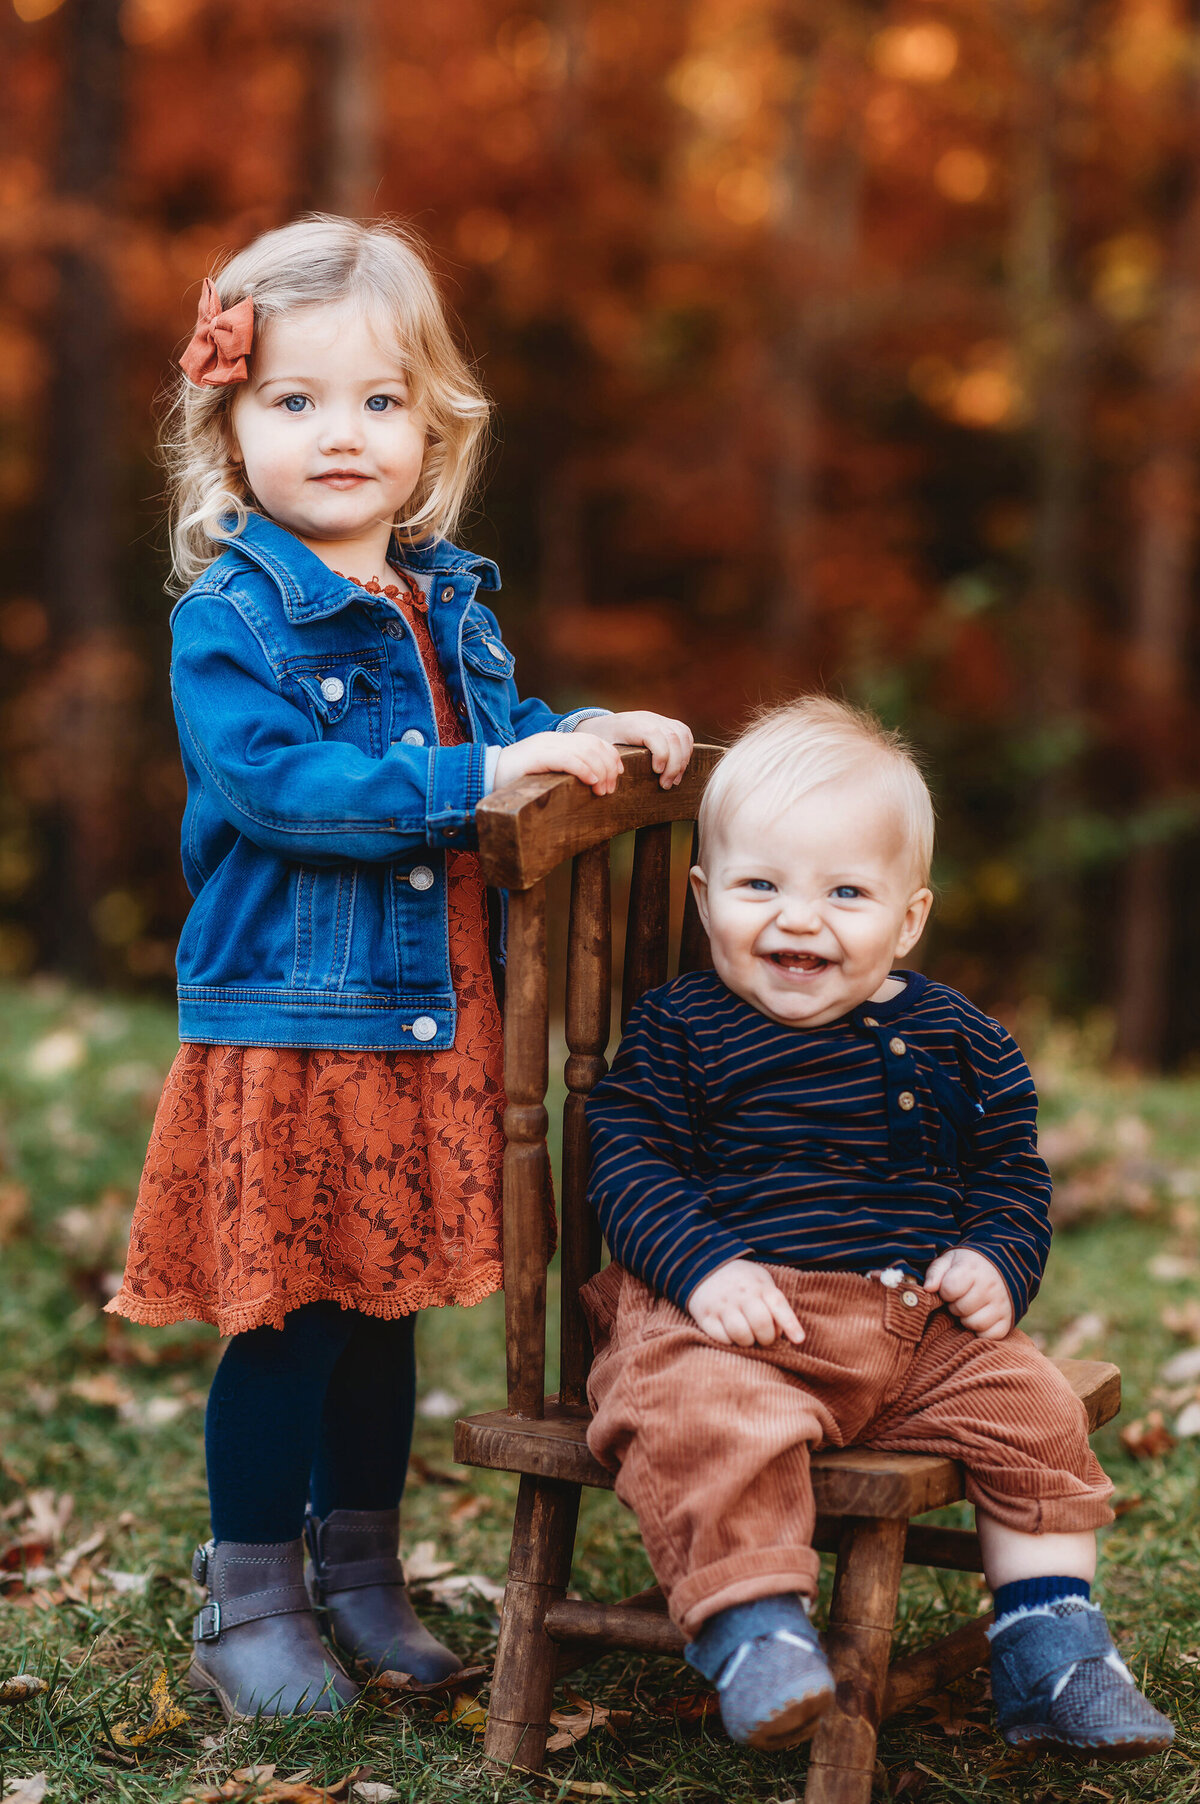 Siblings pose for portraits during Family Portrait Session at Biltmore Estate in Asheville, NC.